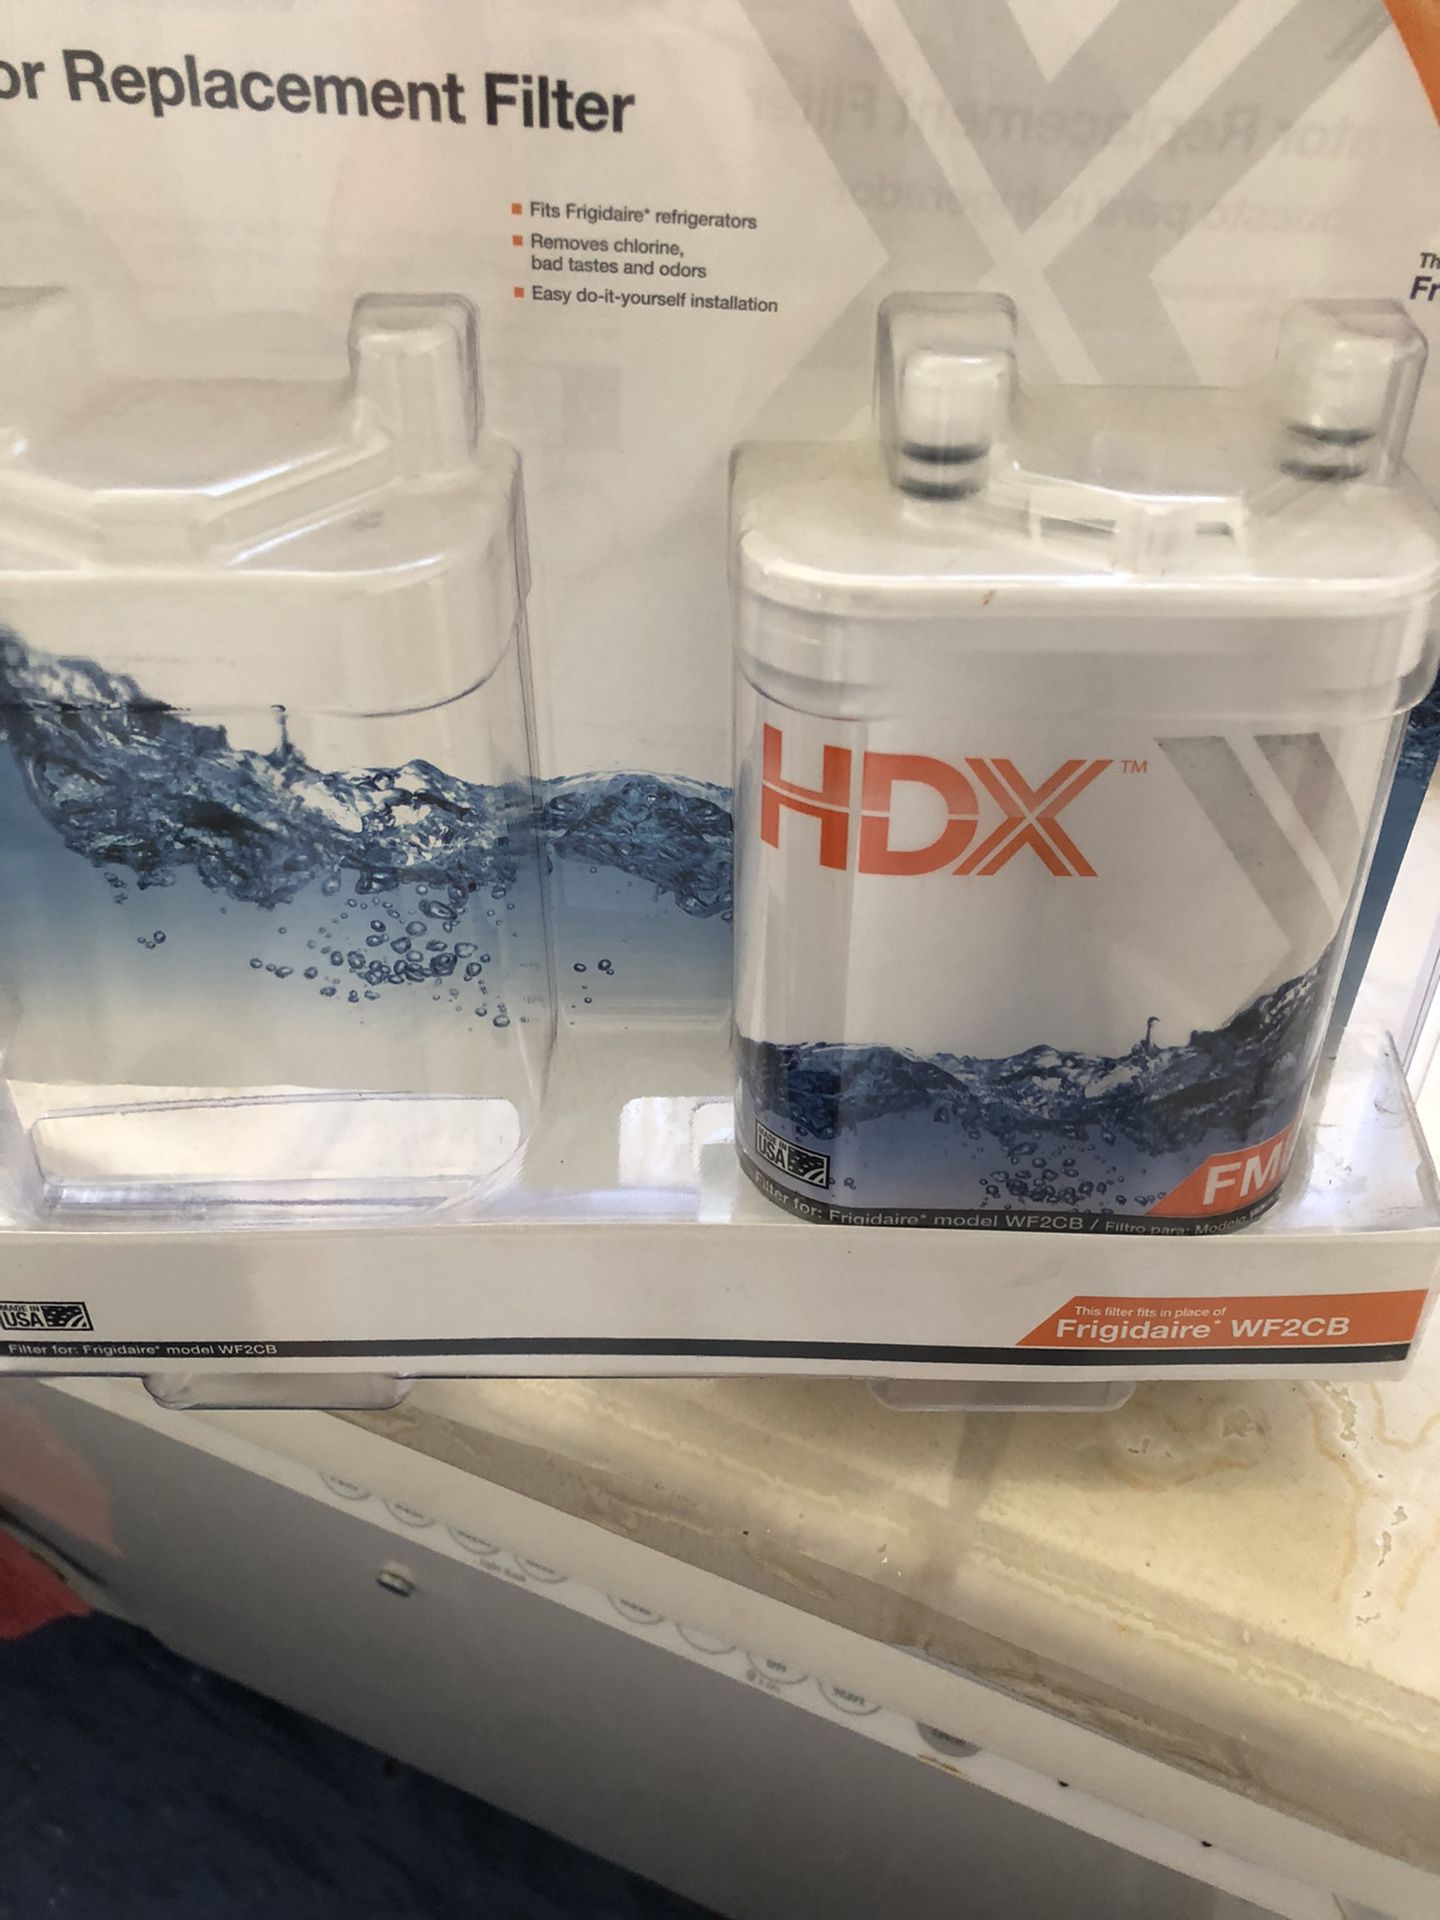 FREE HDX refrigerator replacement filter